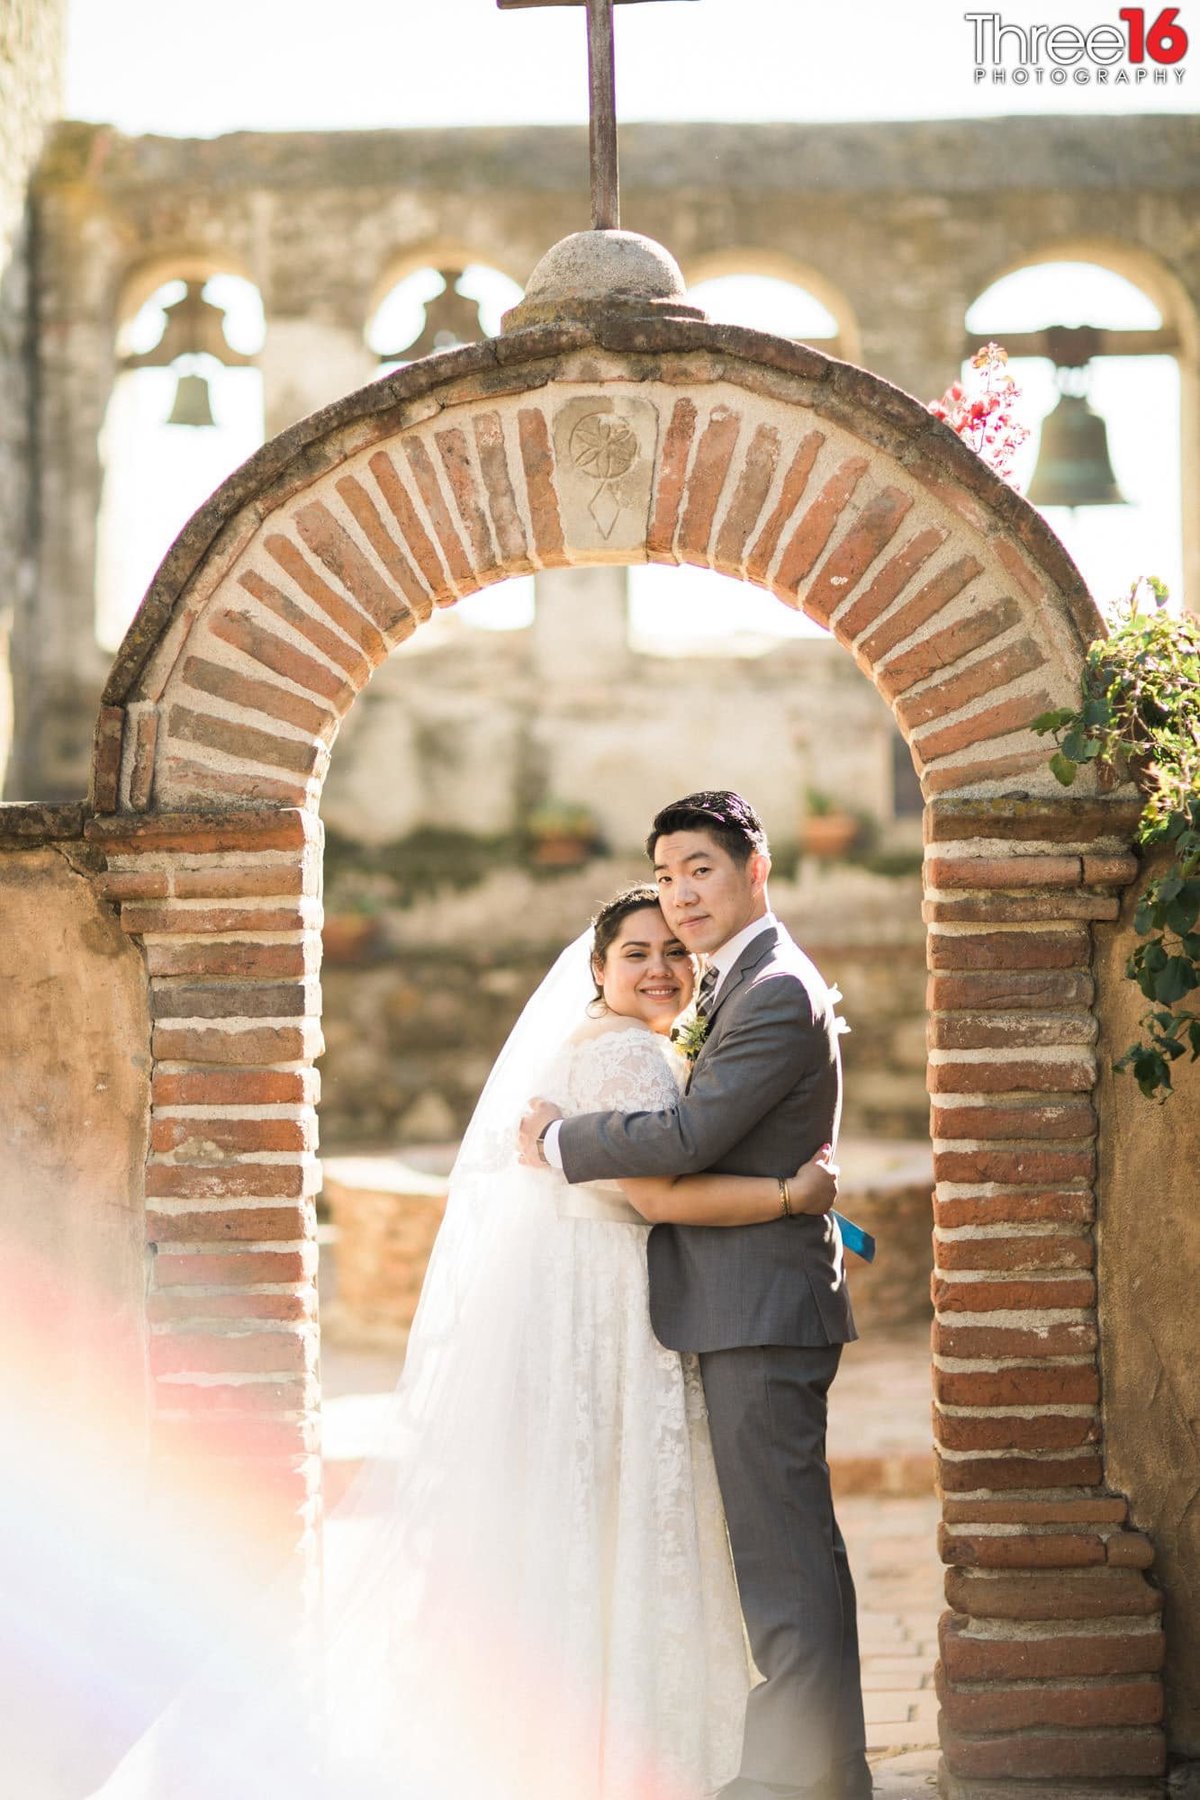 Bride and Groom pose for the photographer under a brick archway